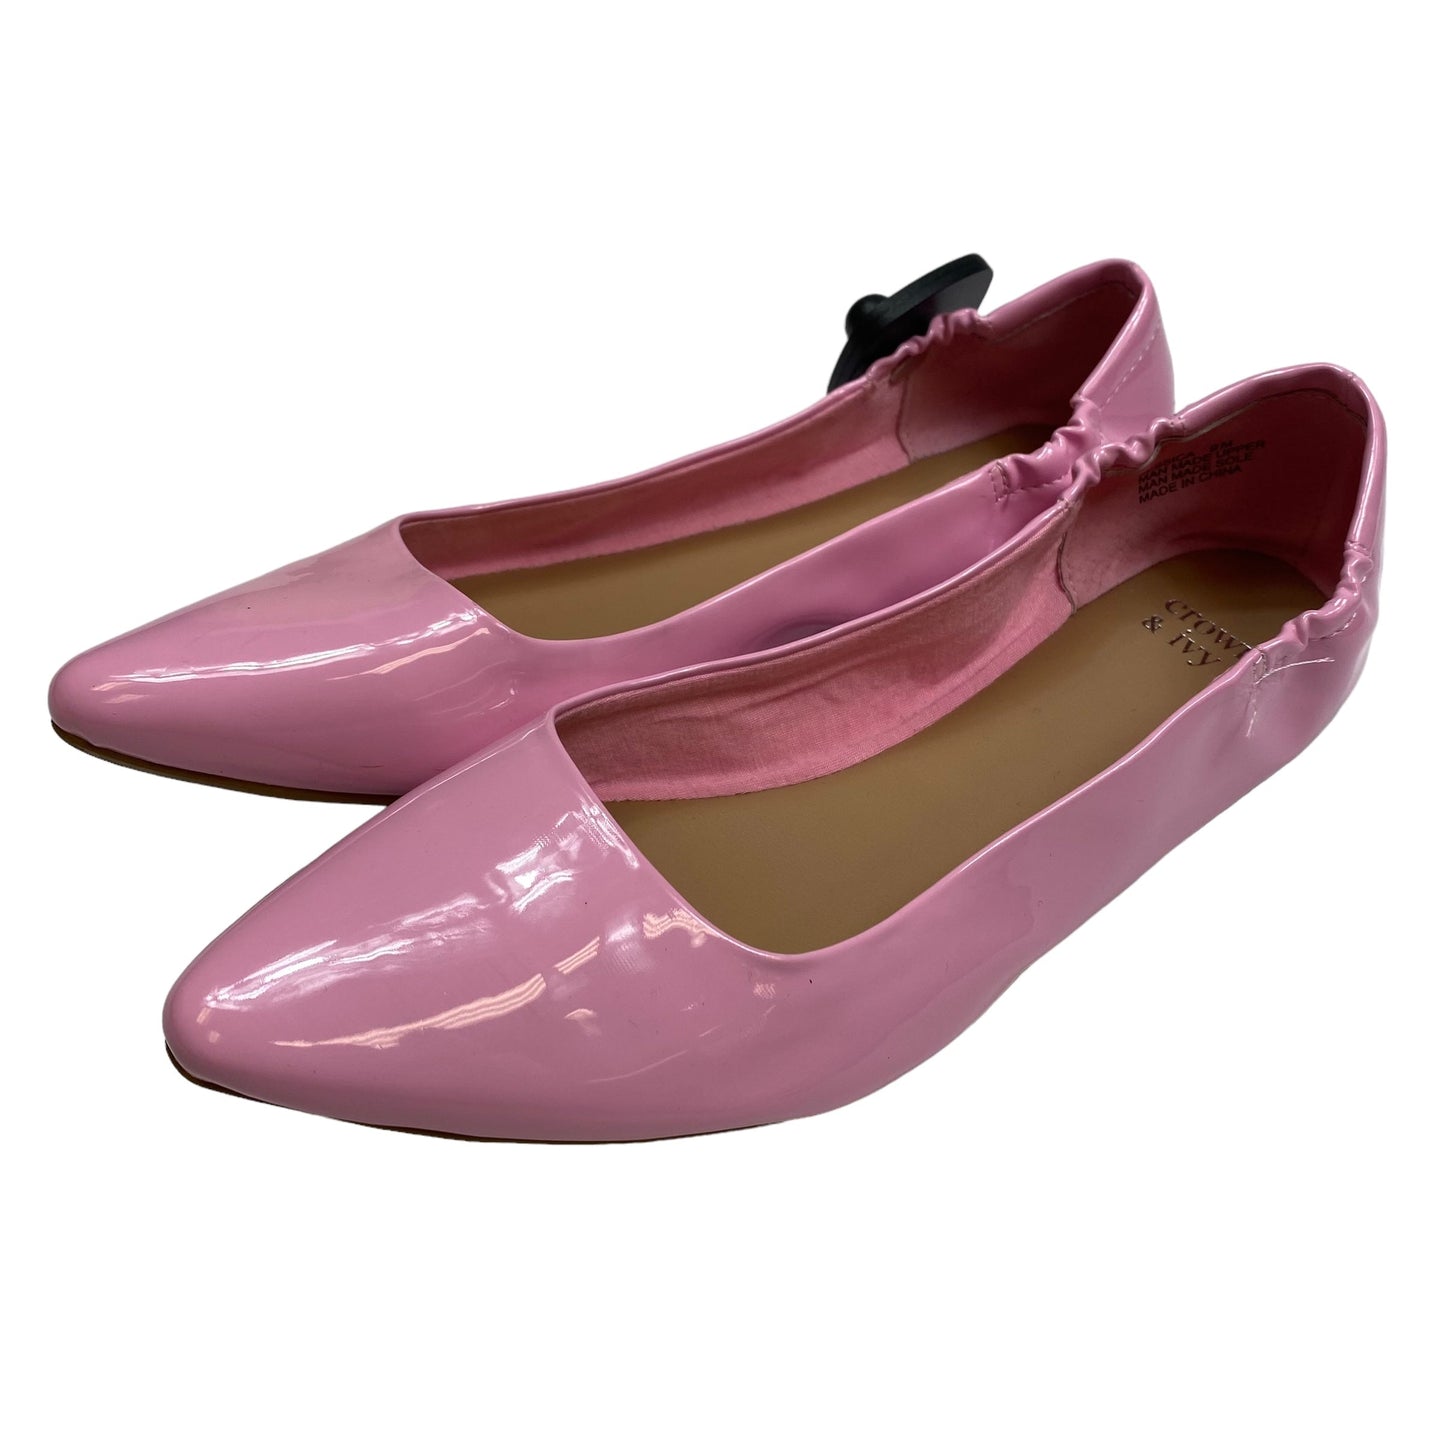 Pink Shoes Flats Crown And Ivy, Size 9